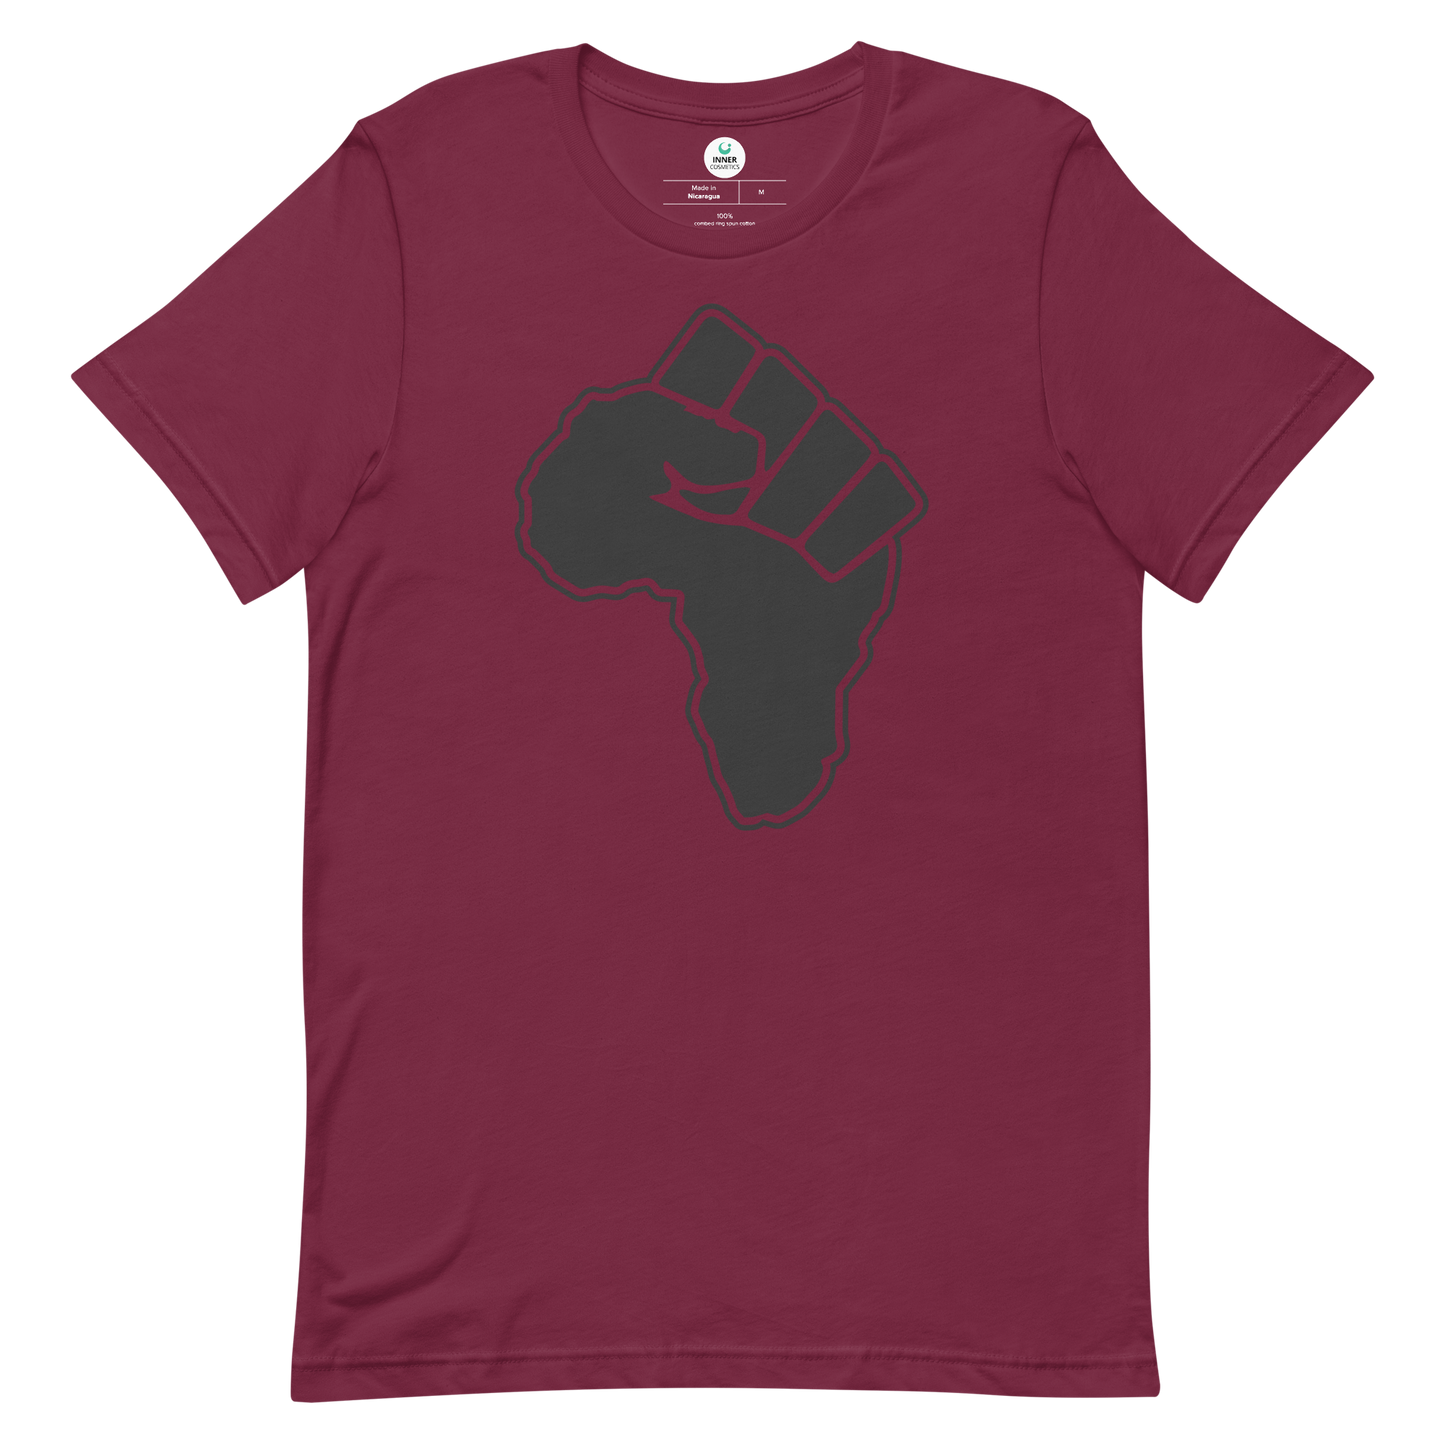 Power to the People Shirt Unisex t-shirt